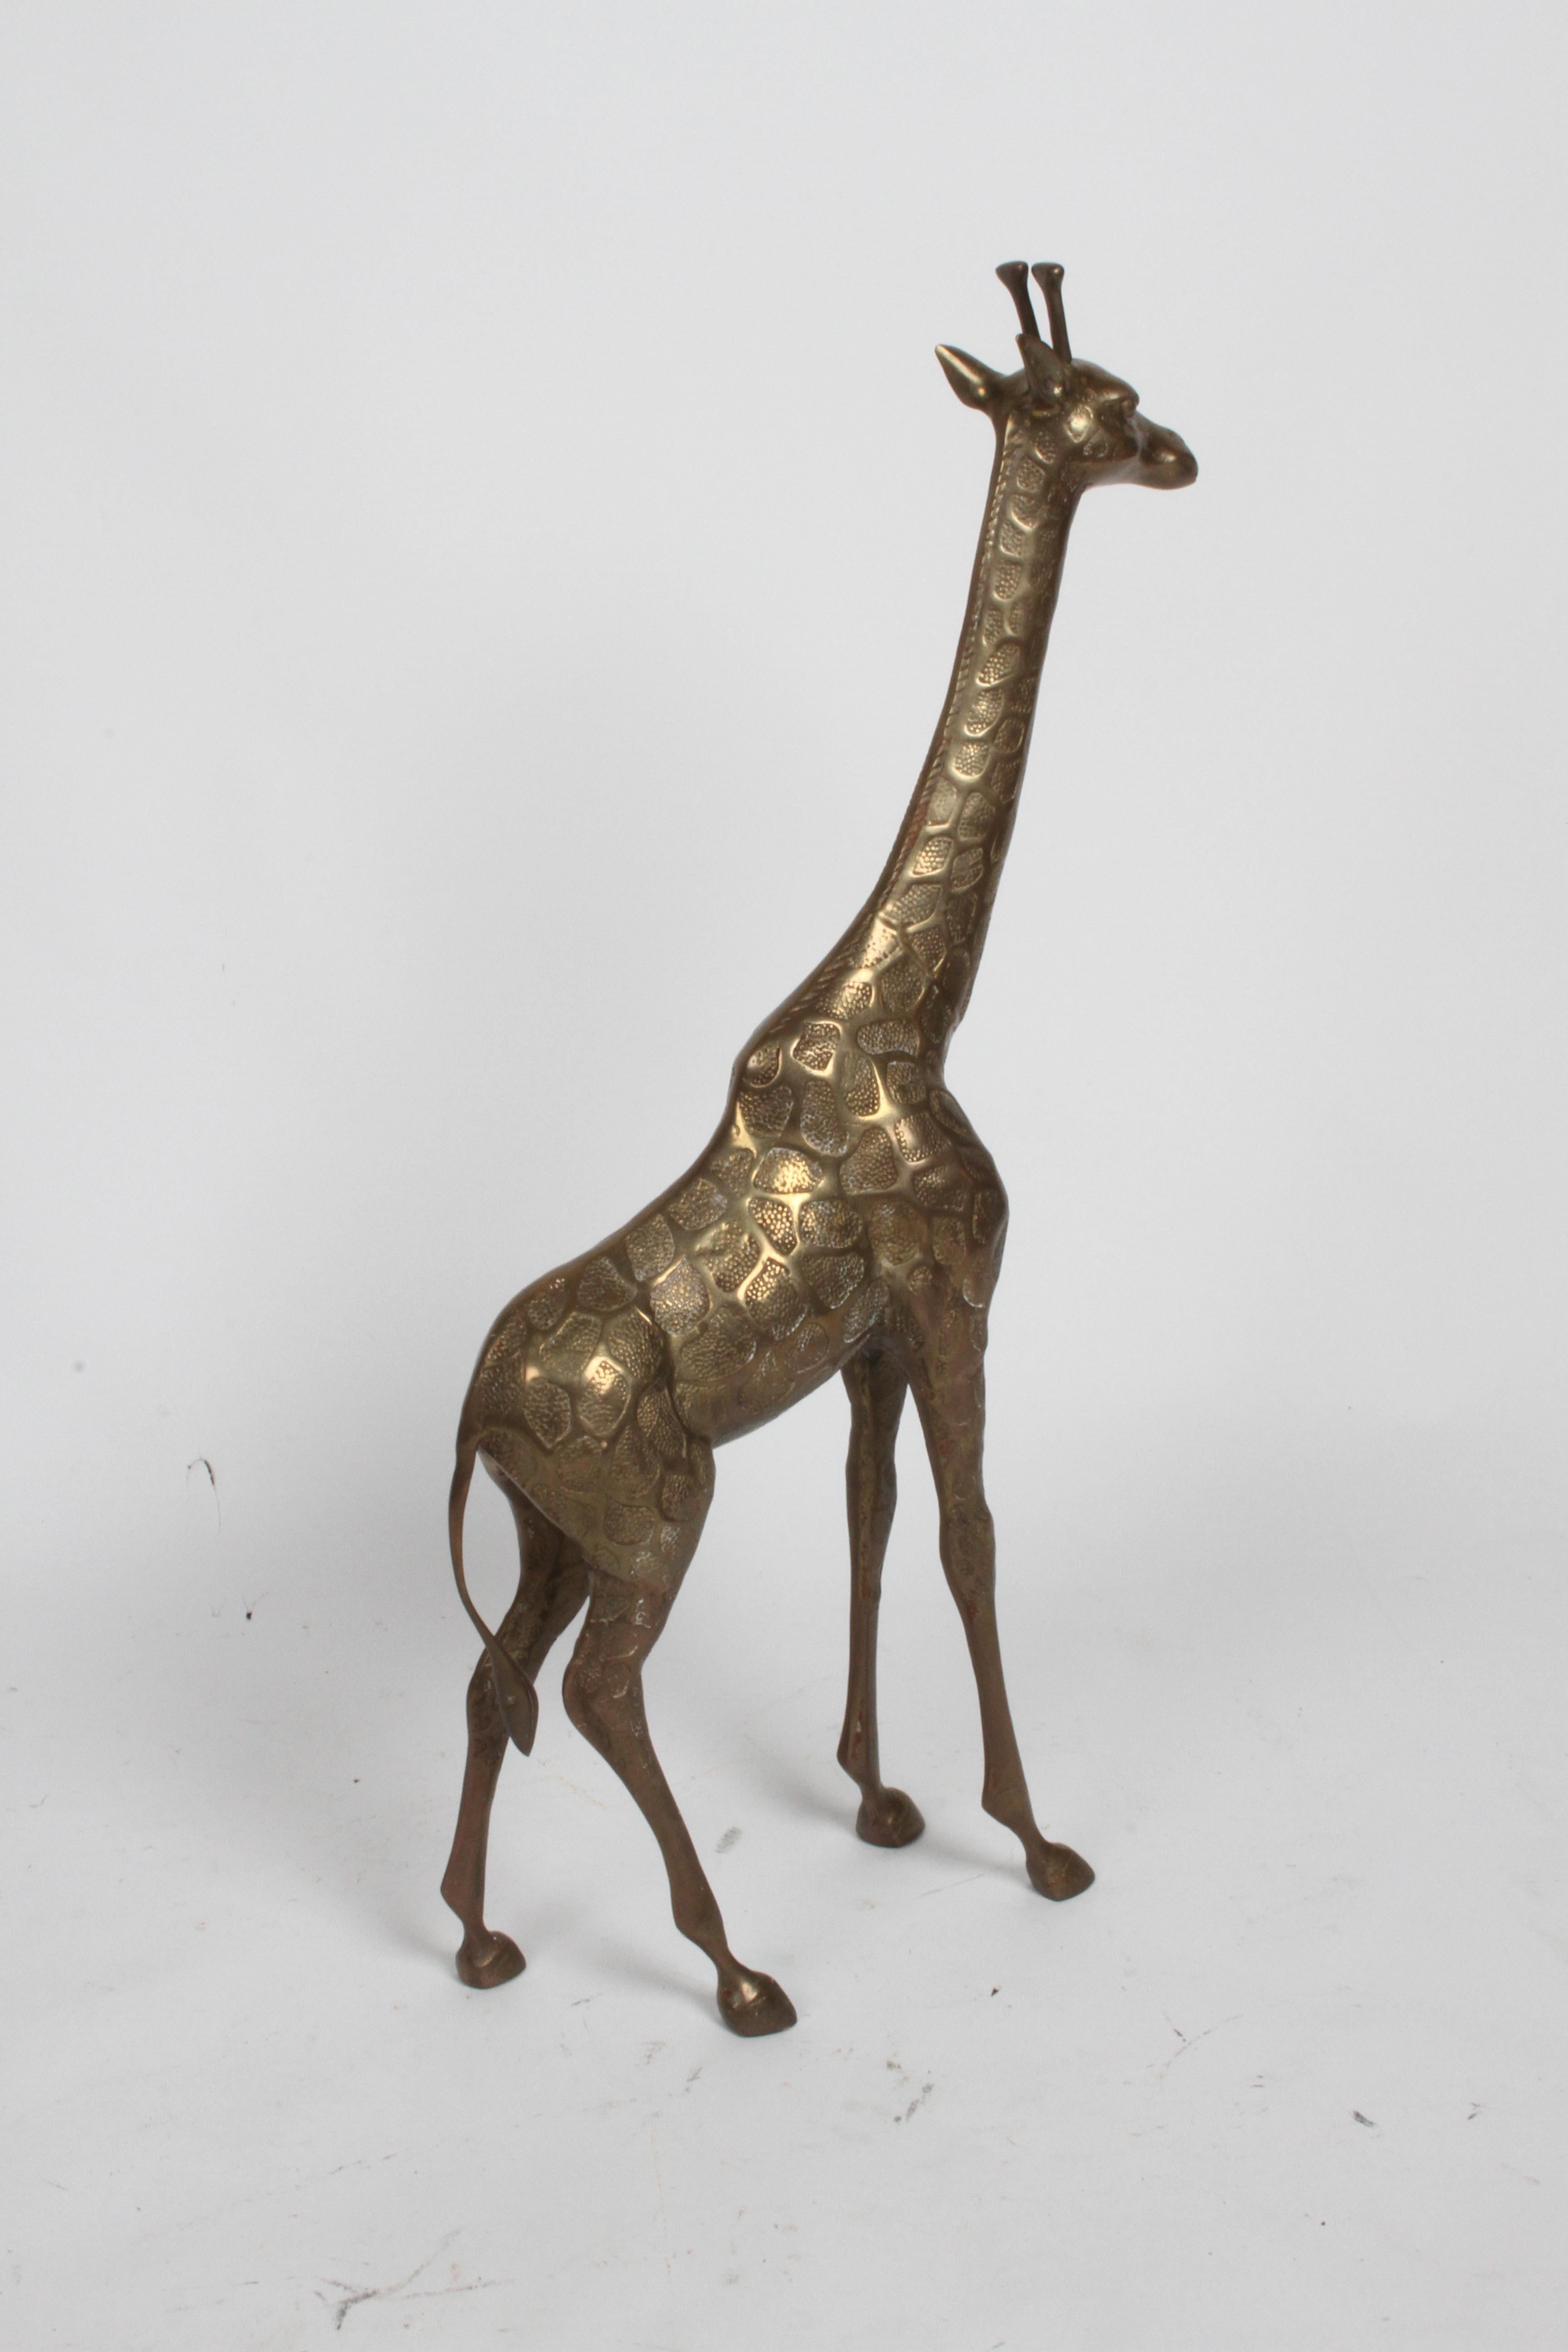 Late 20th Century Hollywood Regency Style Brass Giraffe Floor Statue or Sculpture, circa 1970s For Sale